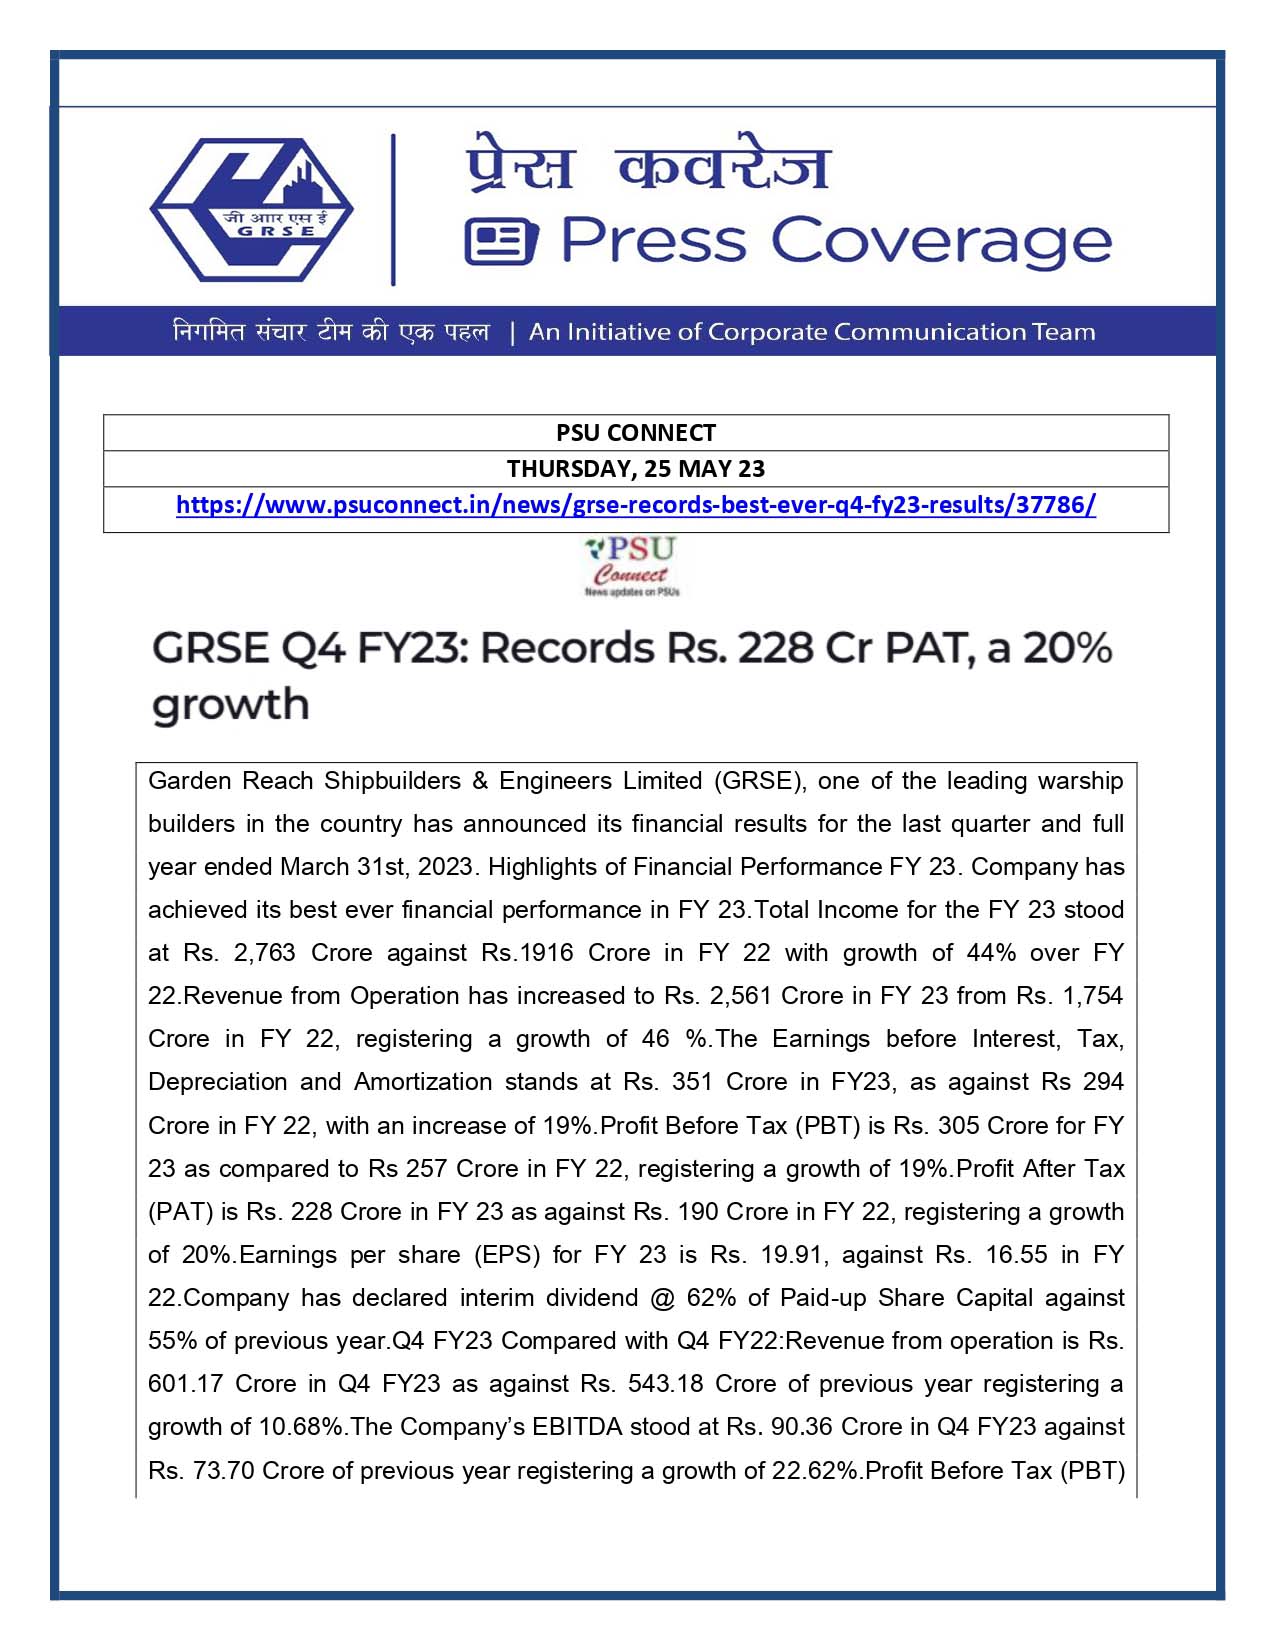 GRSE Q4 FY23 : Records Rs 228 Cr PAT, a 20% growth